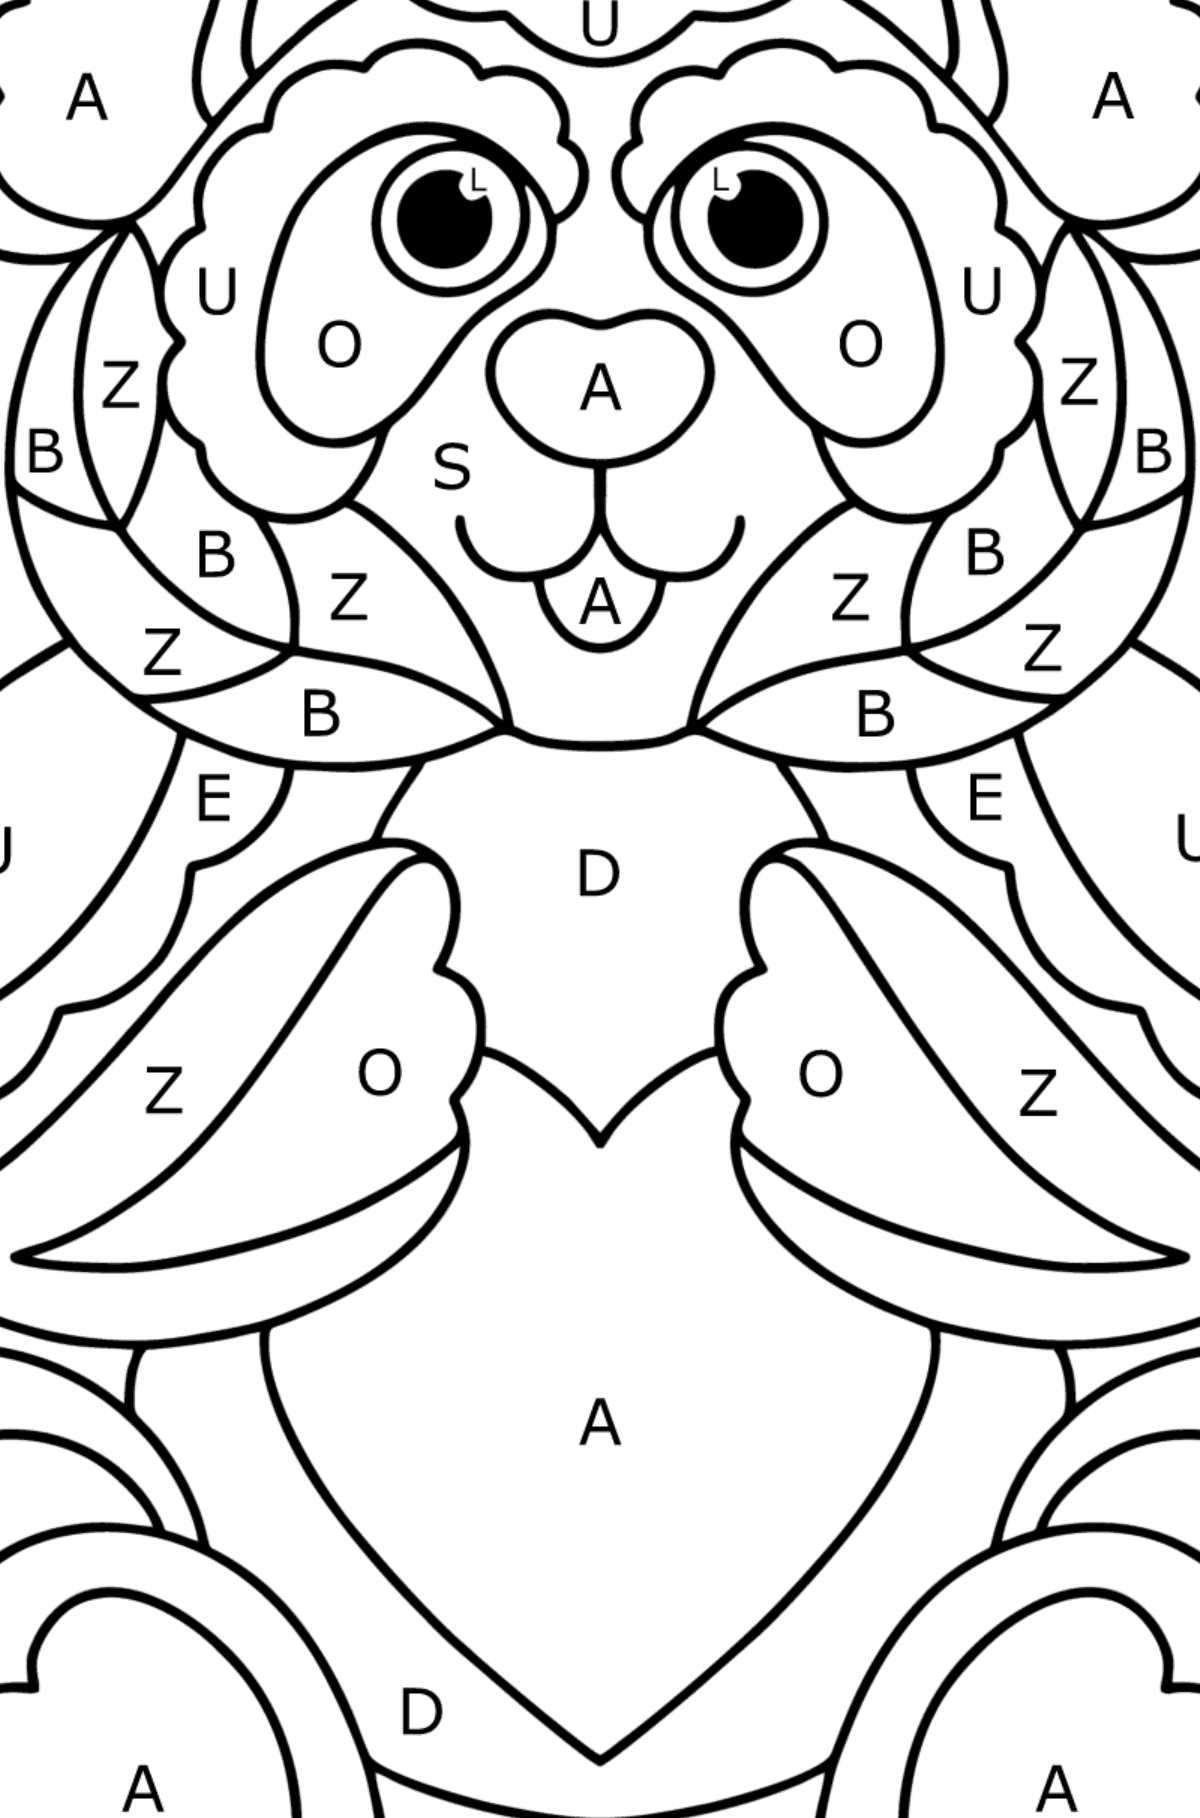 Panda antistress coloring page - Coloring by Letters for Kids